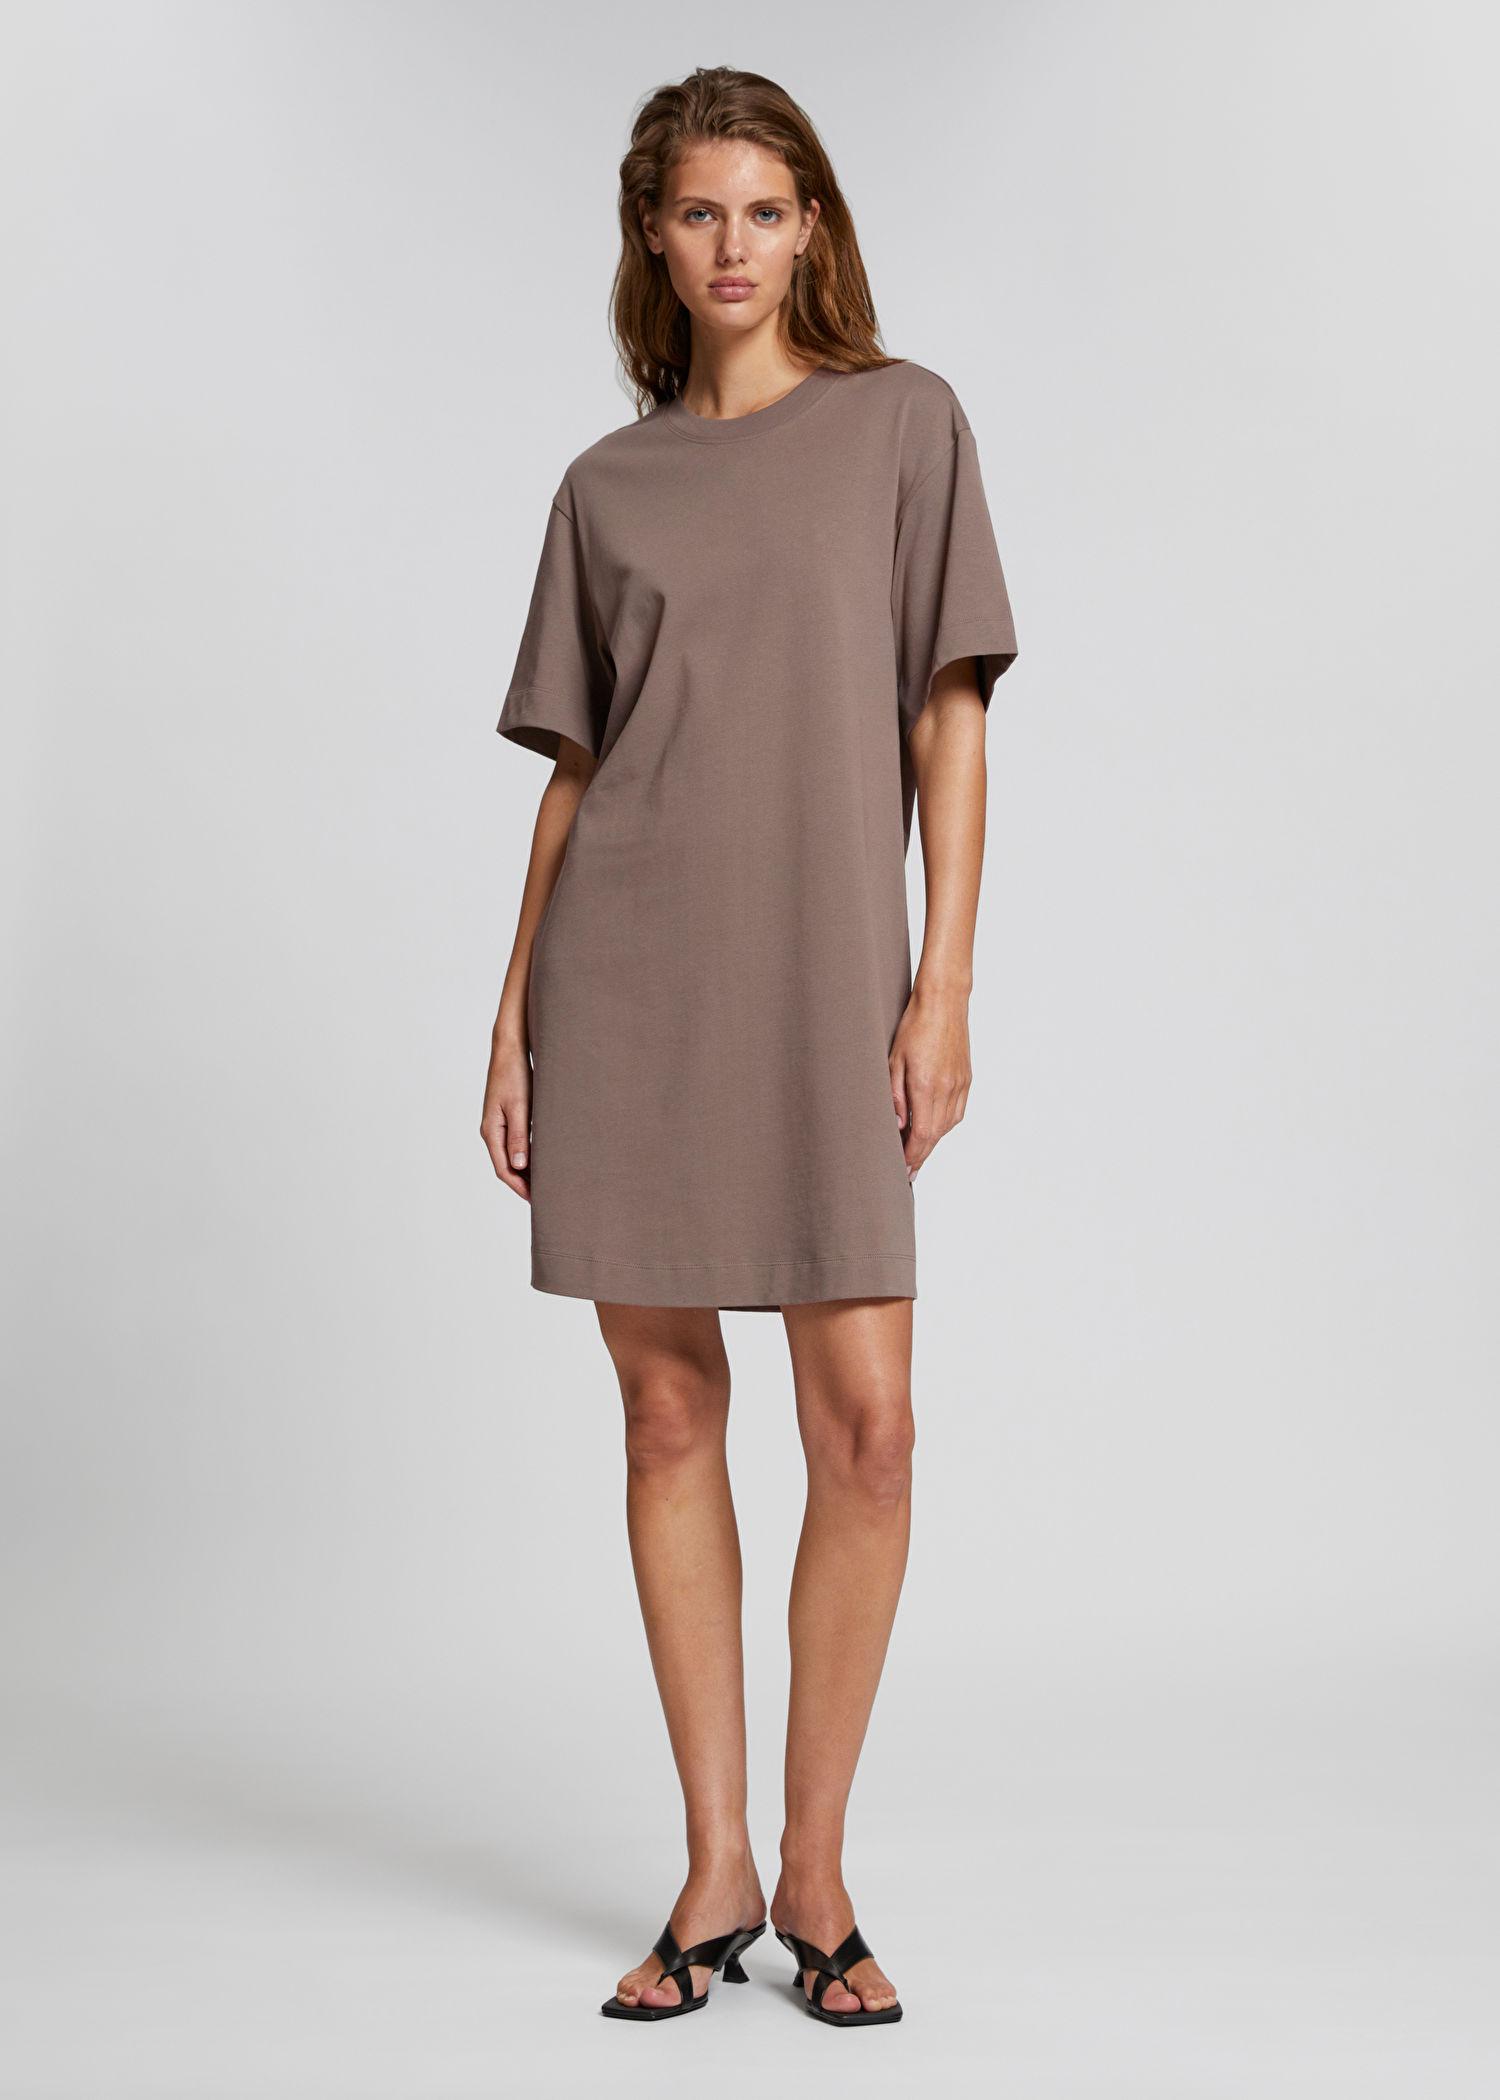 & Other Stories Loose-fit Round Neck T-shirt Dress in Natural | Lyst Canada